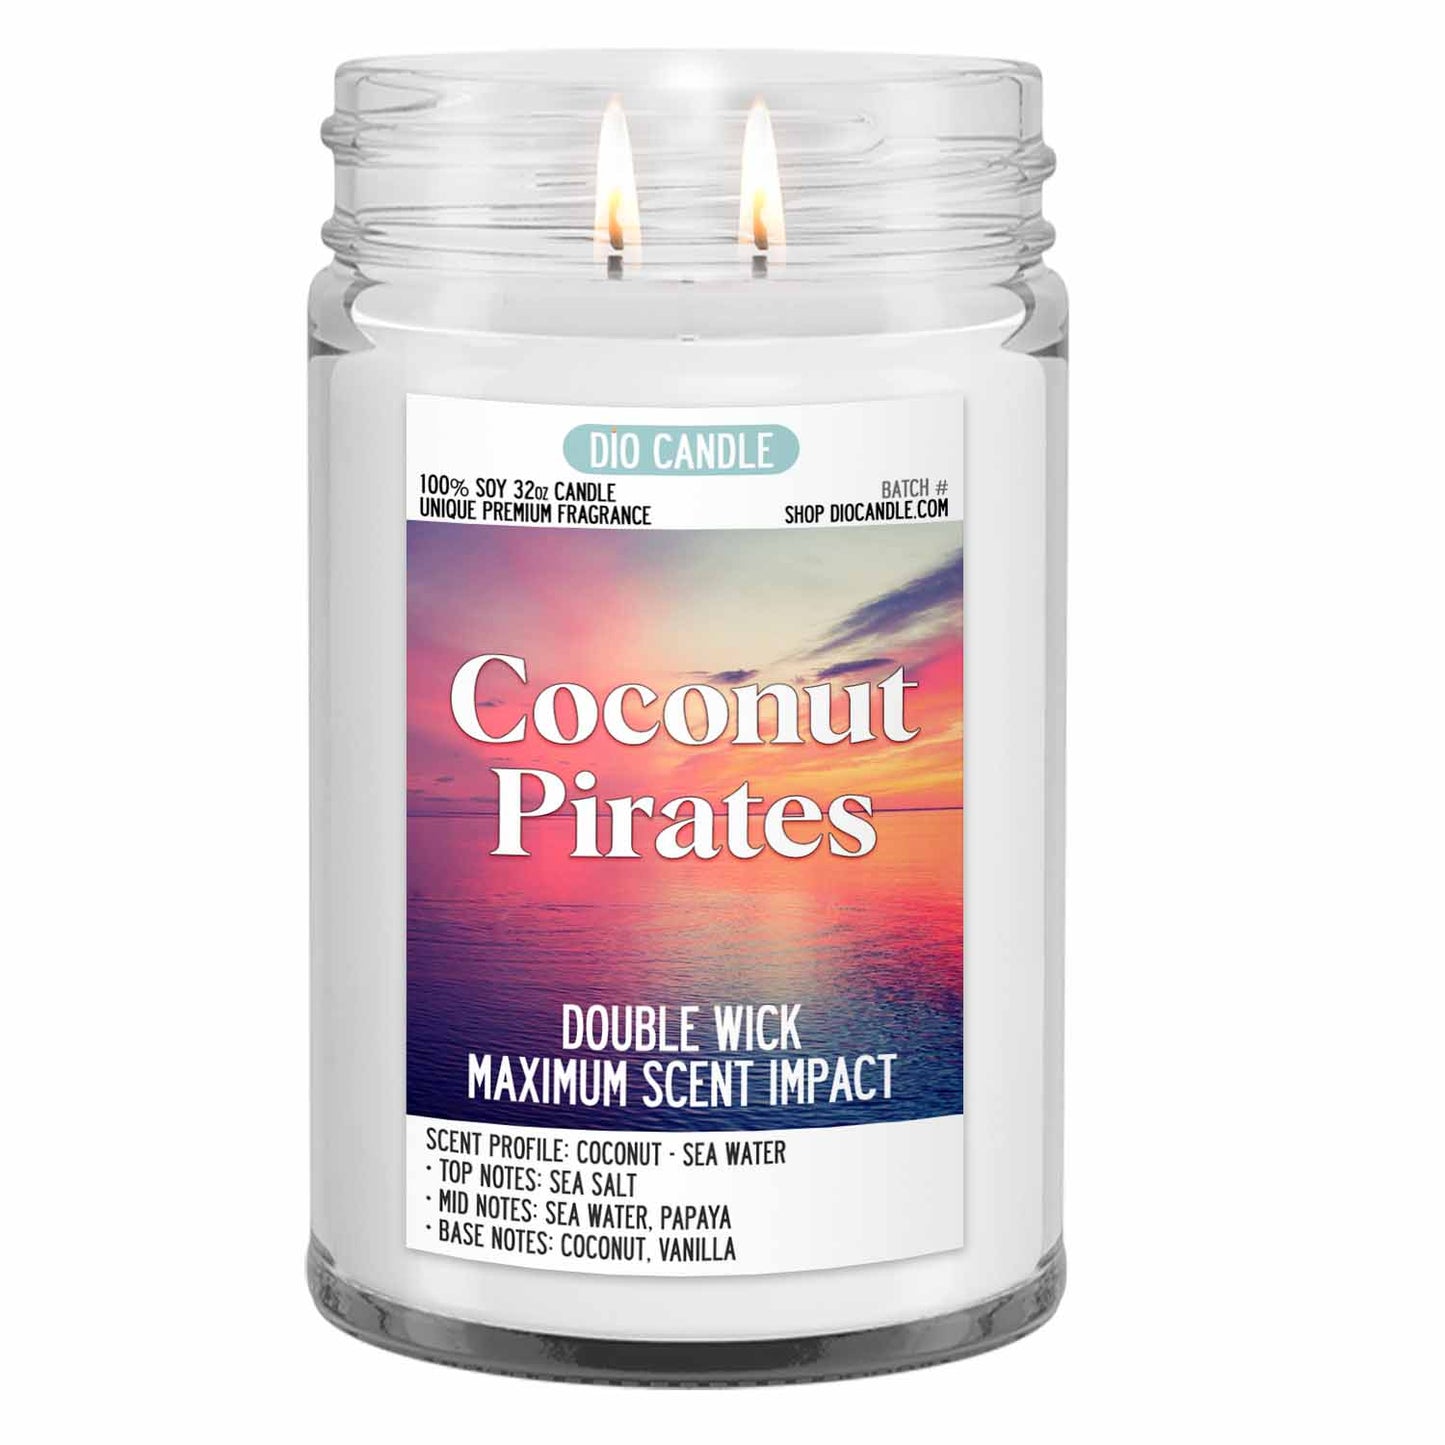 Coconut Pirates Candle